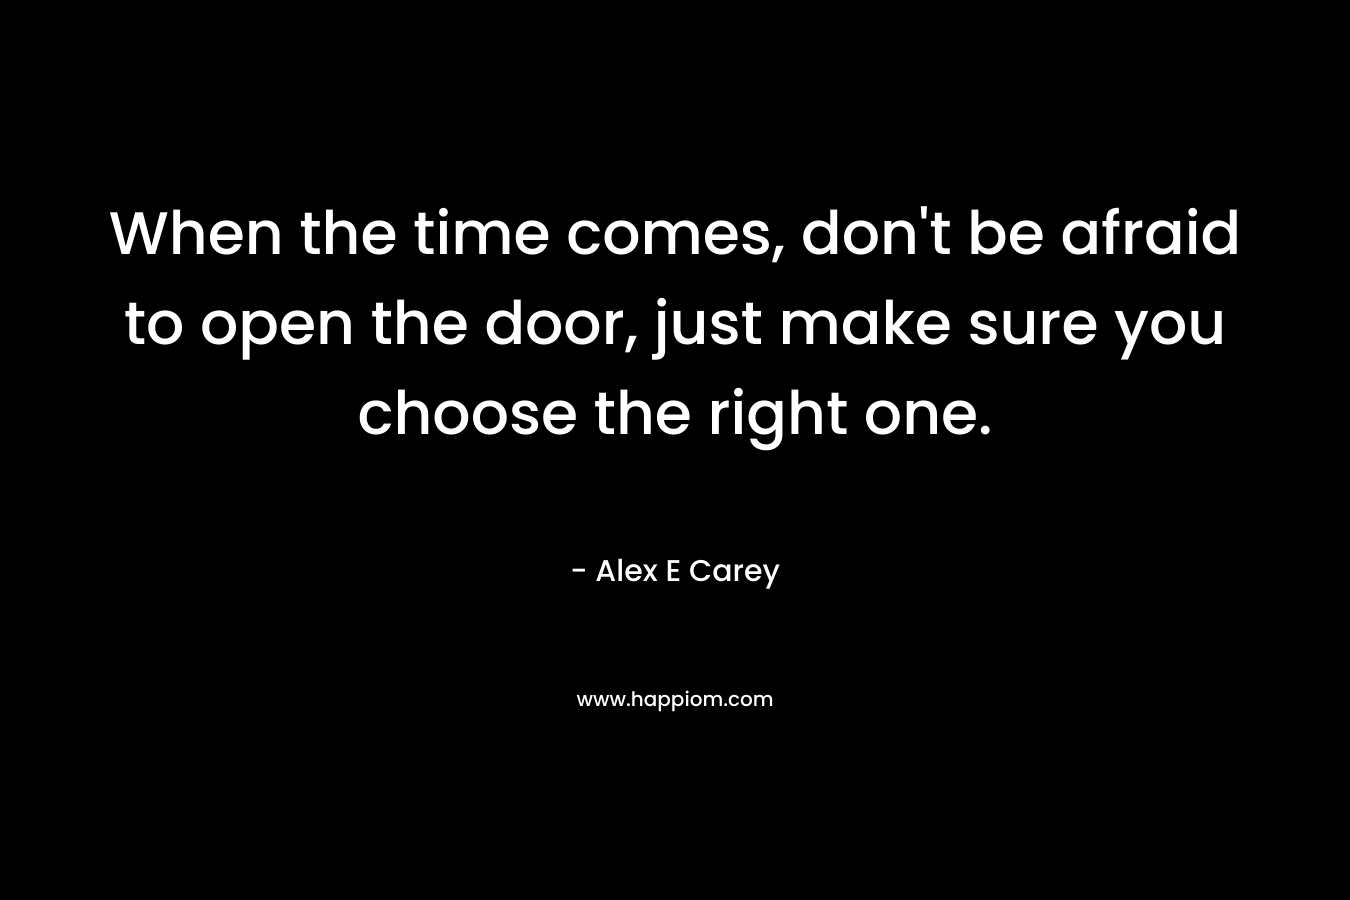 When the time comes, don’t be afraid to open the door, just make sure you choose the right one. – Alex E Carey